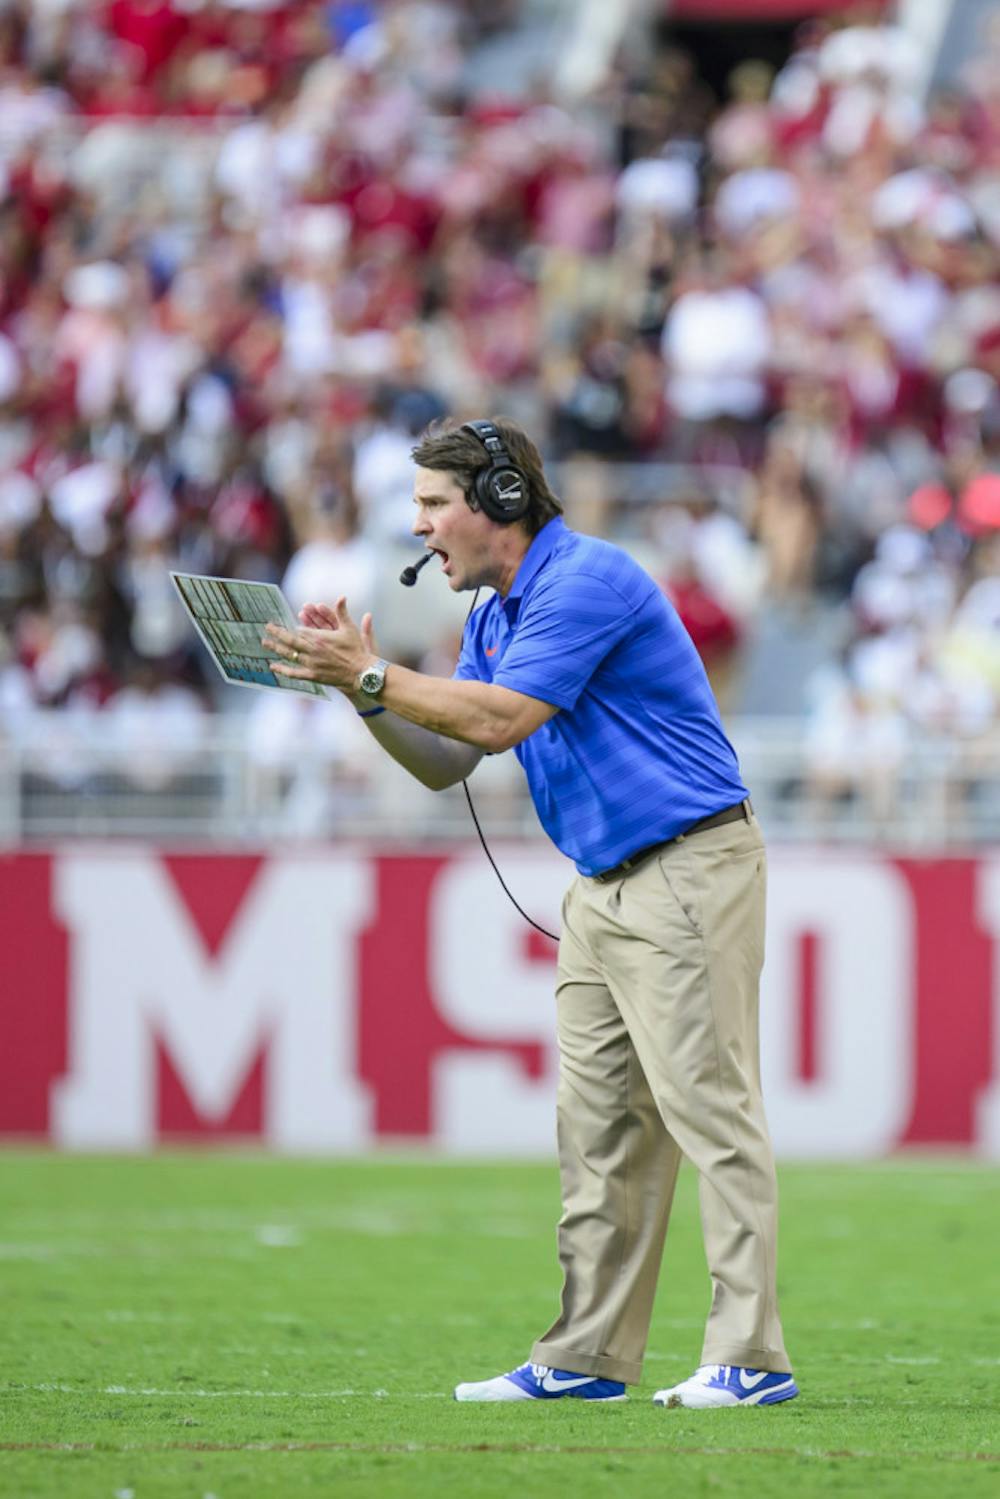 <p>Will Muschamp reacts after a play during Florida's 42-21 loss to Alabama on Saturday at Bryant-Denny Stadium.</p>